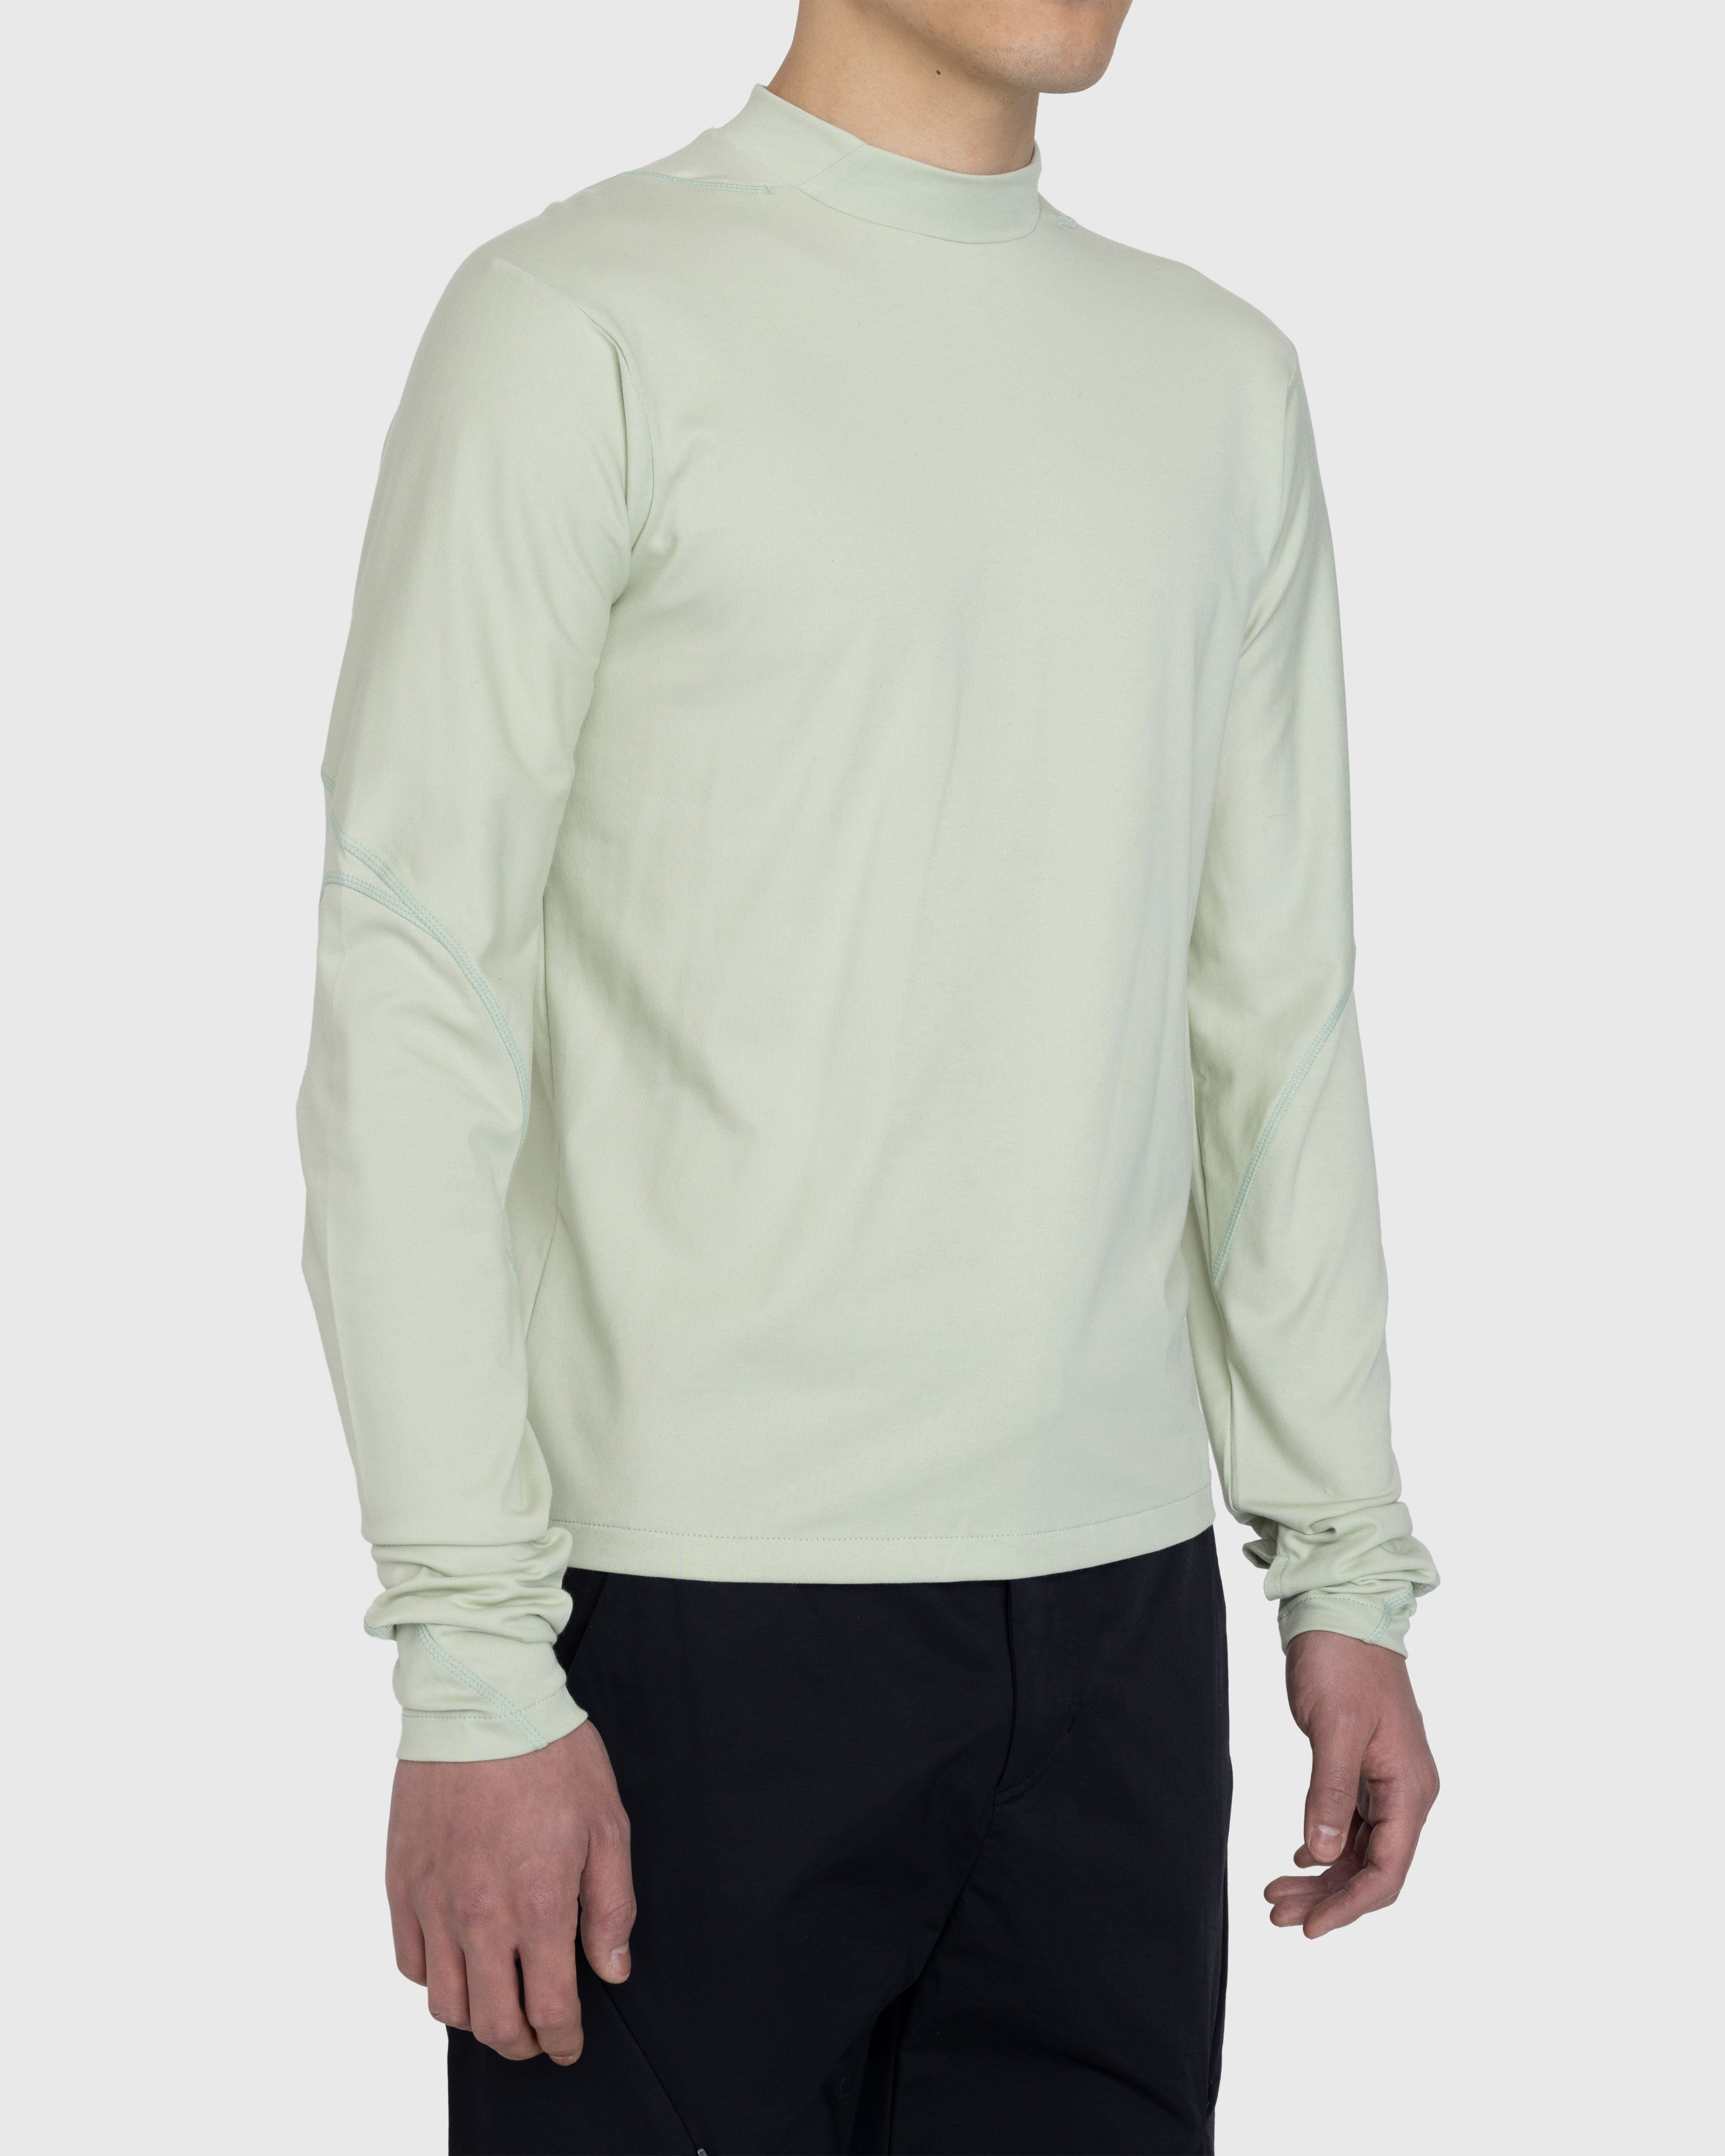 Post Archive Faction (PAF) - 5.0 Longsleeve Right Shirt Lime - Clothing - Green - Image 3